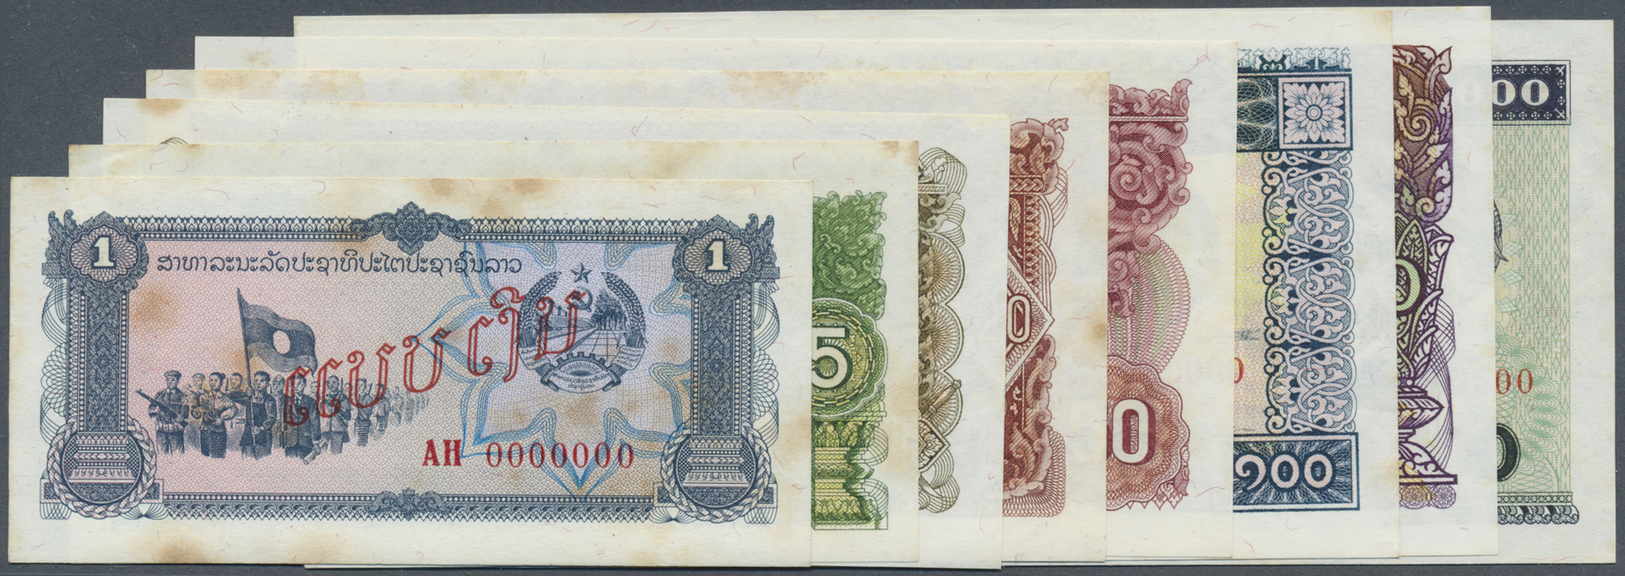 01367 Laos: Set Of 8 Specimen Notes From 1 To 1000 Kip P. 25s-32s, All With Stains In Paper But Unfolded, Condition: XF+ - Laos